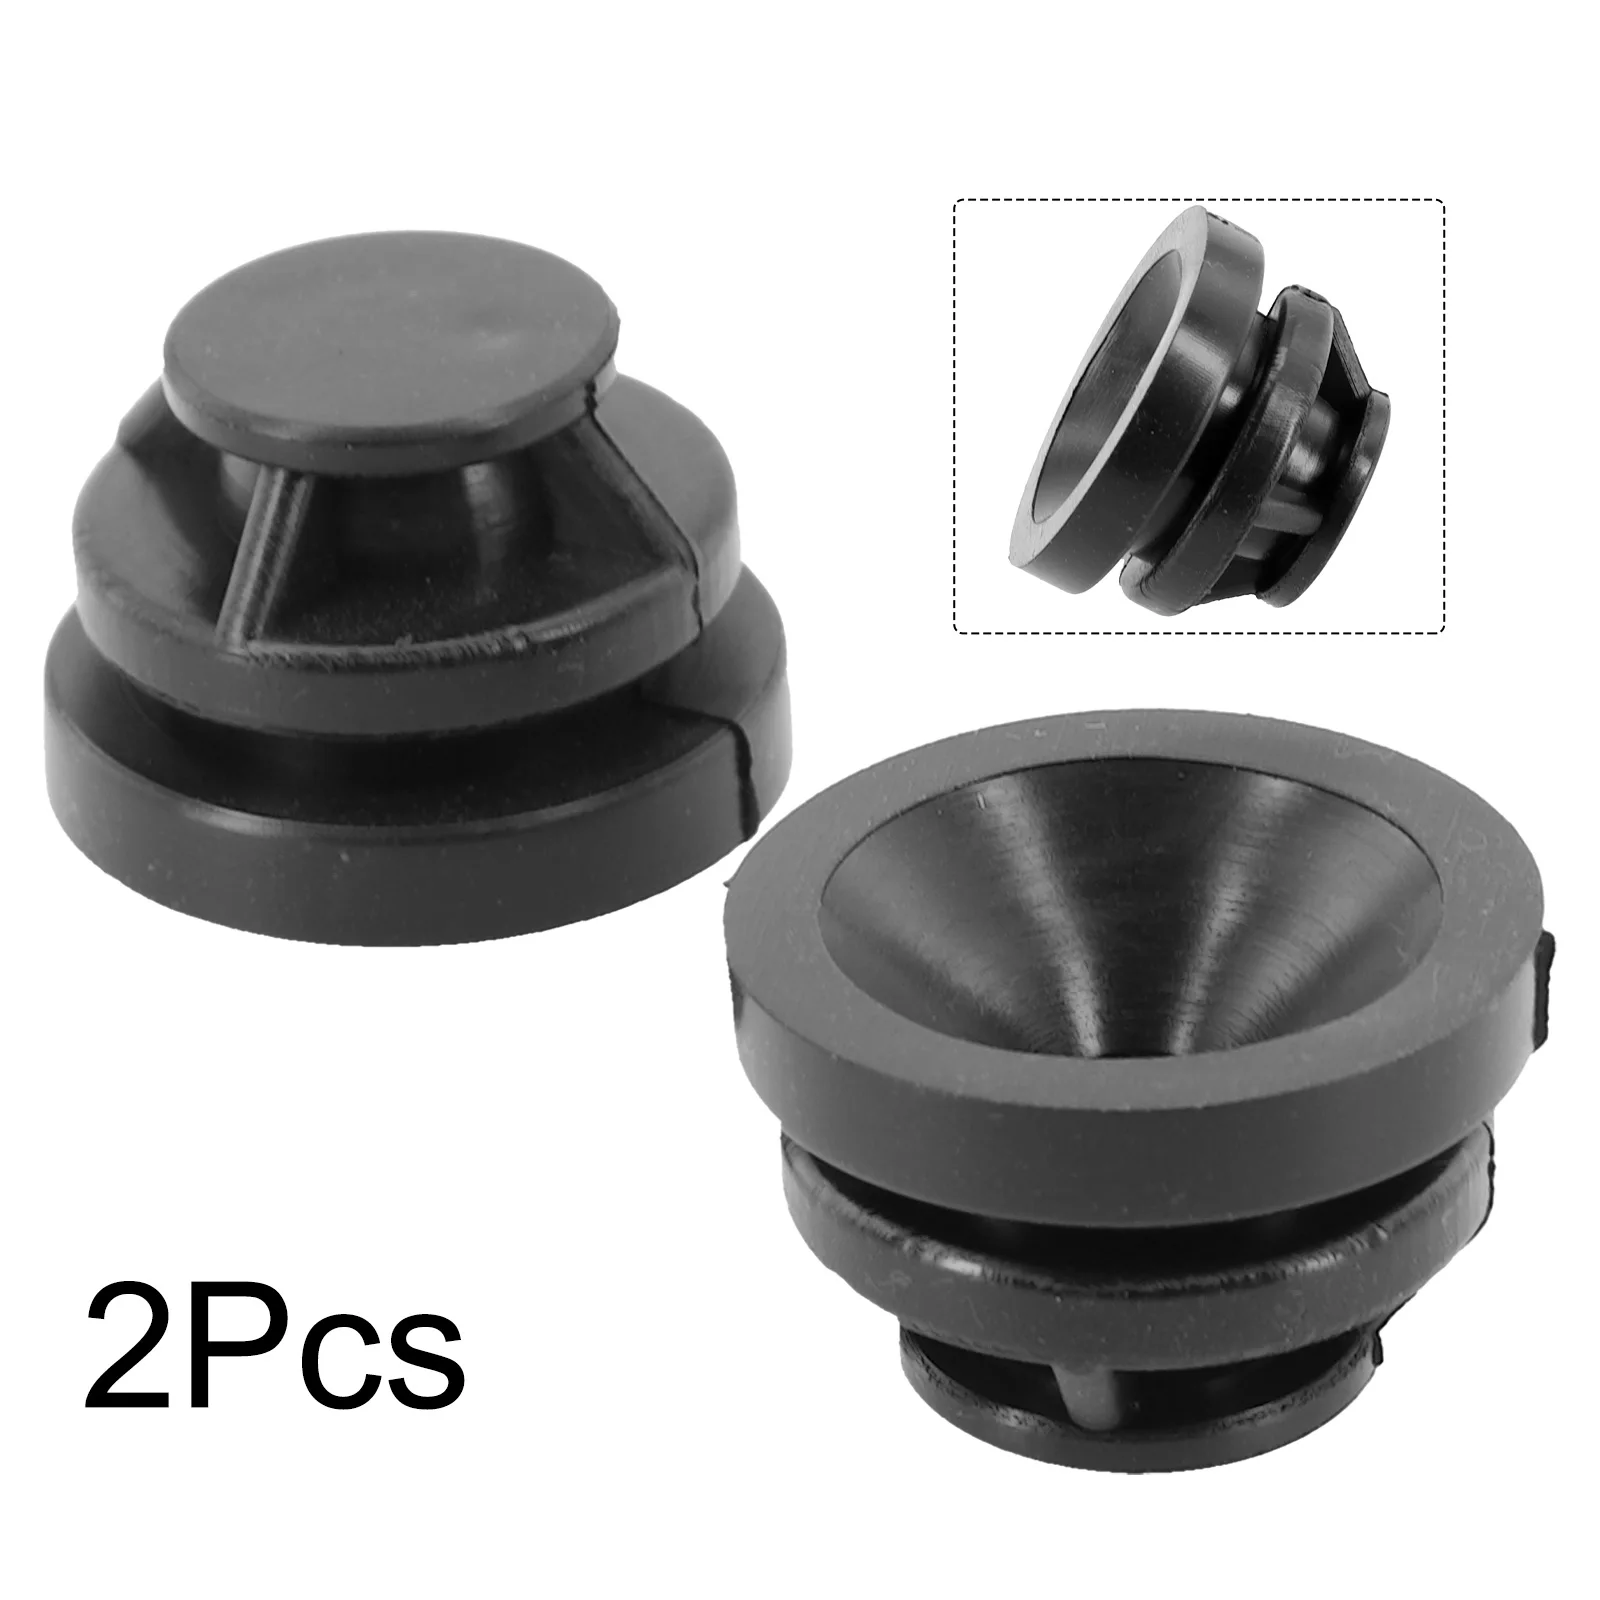 

Car Accessories Engine Cover Mounts For Mazda CX-9 TC 2016 - 2021 P30110238 Rubber Black Car Engine Cover Rubber Mount Car None